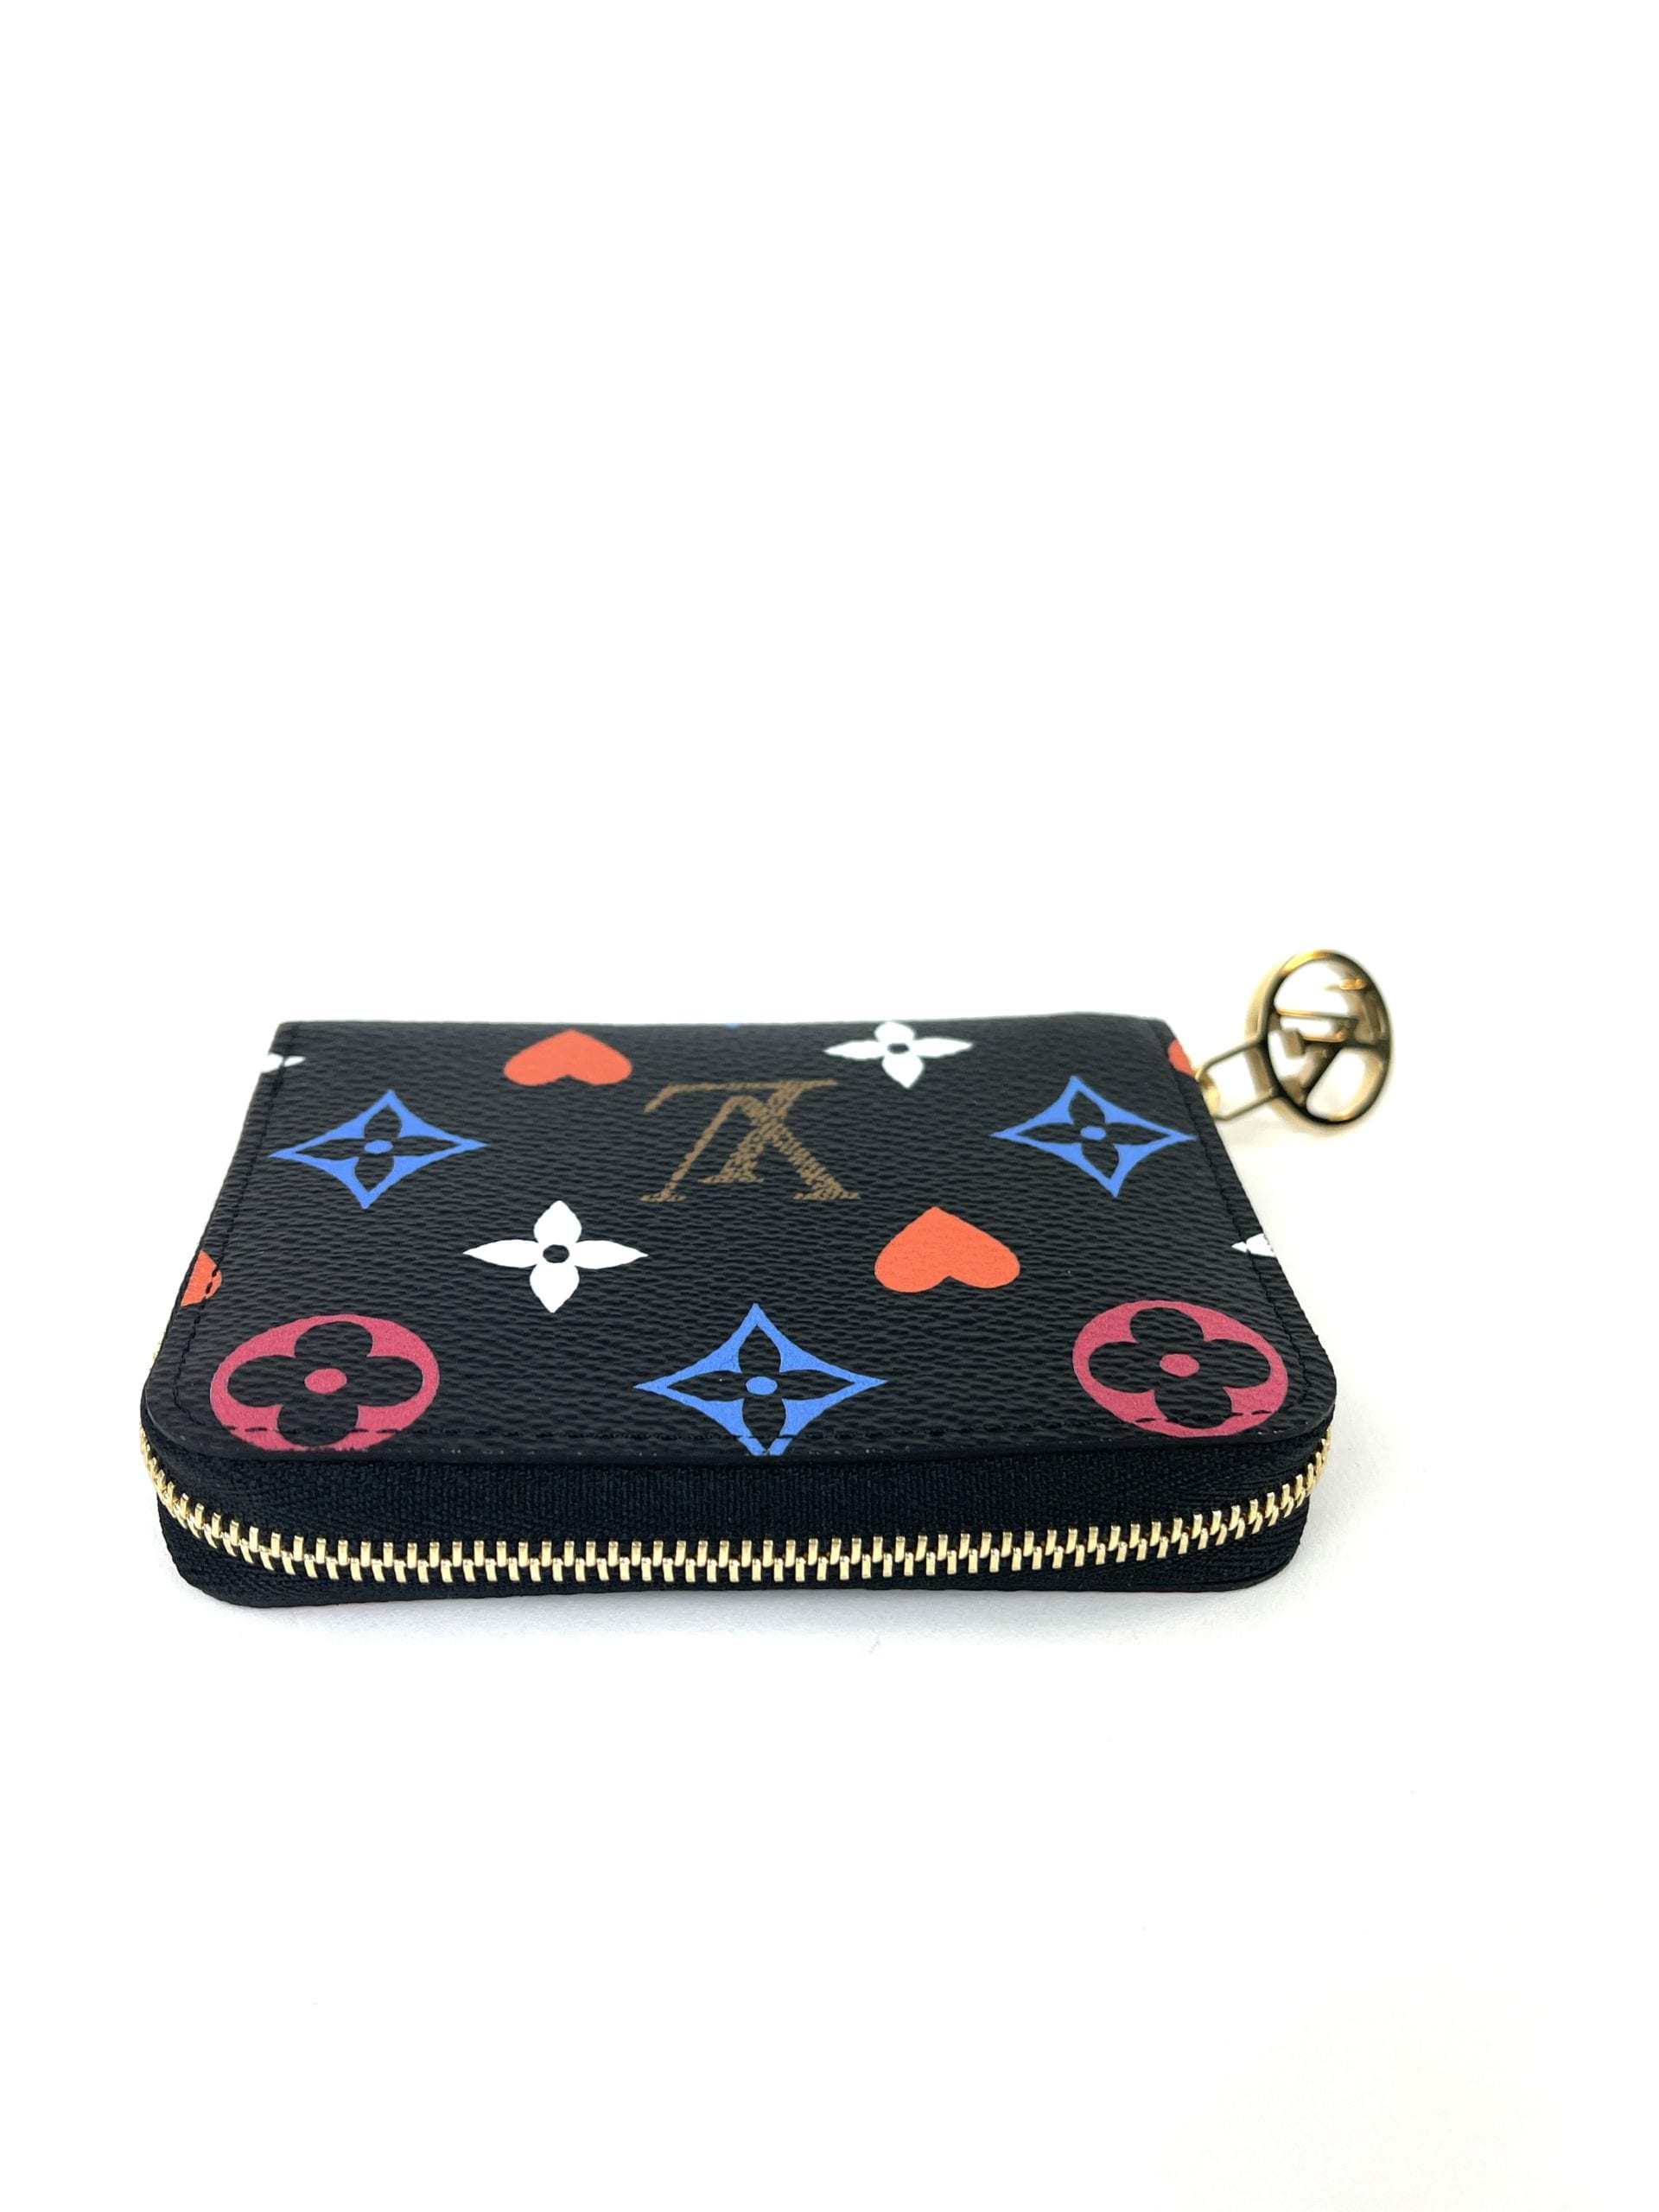 COMPARISON BETWEEN AUTHENTIC AND FAKE LOUIS VUITTON ZIPPY COIN PURSE 